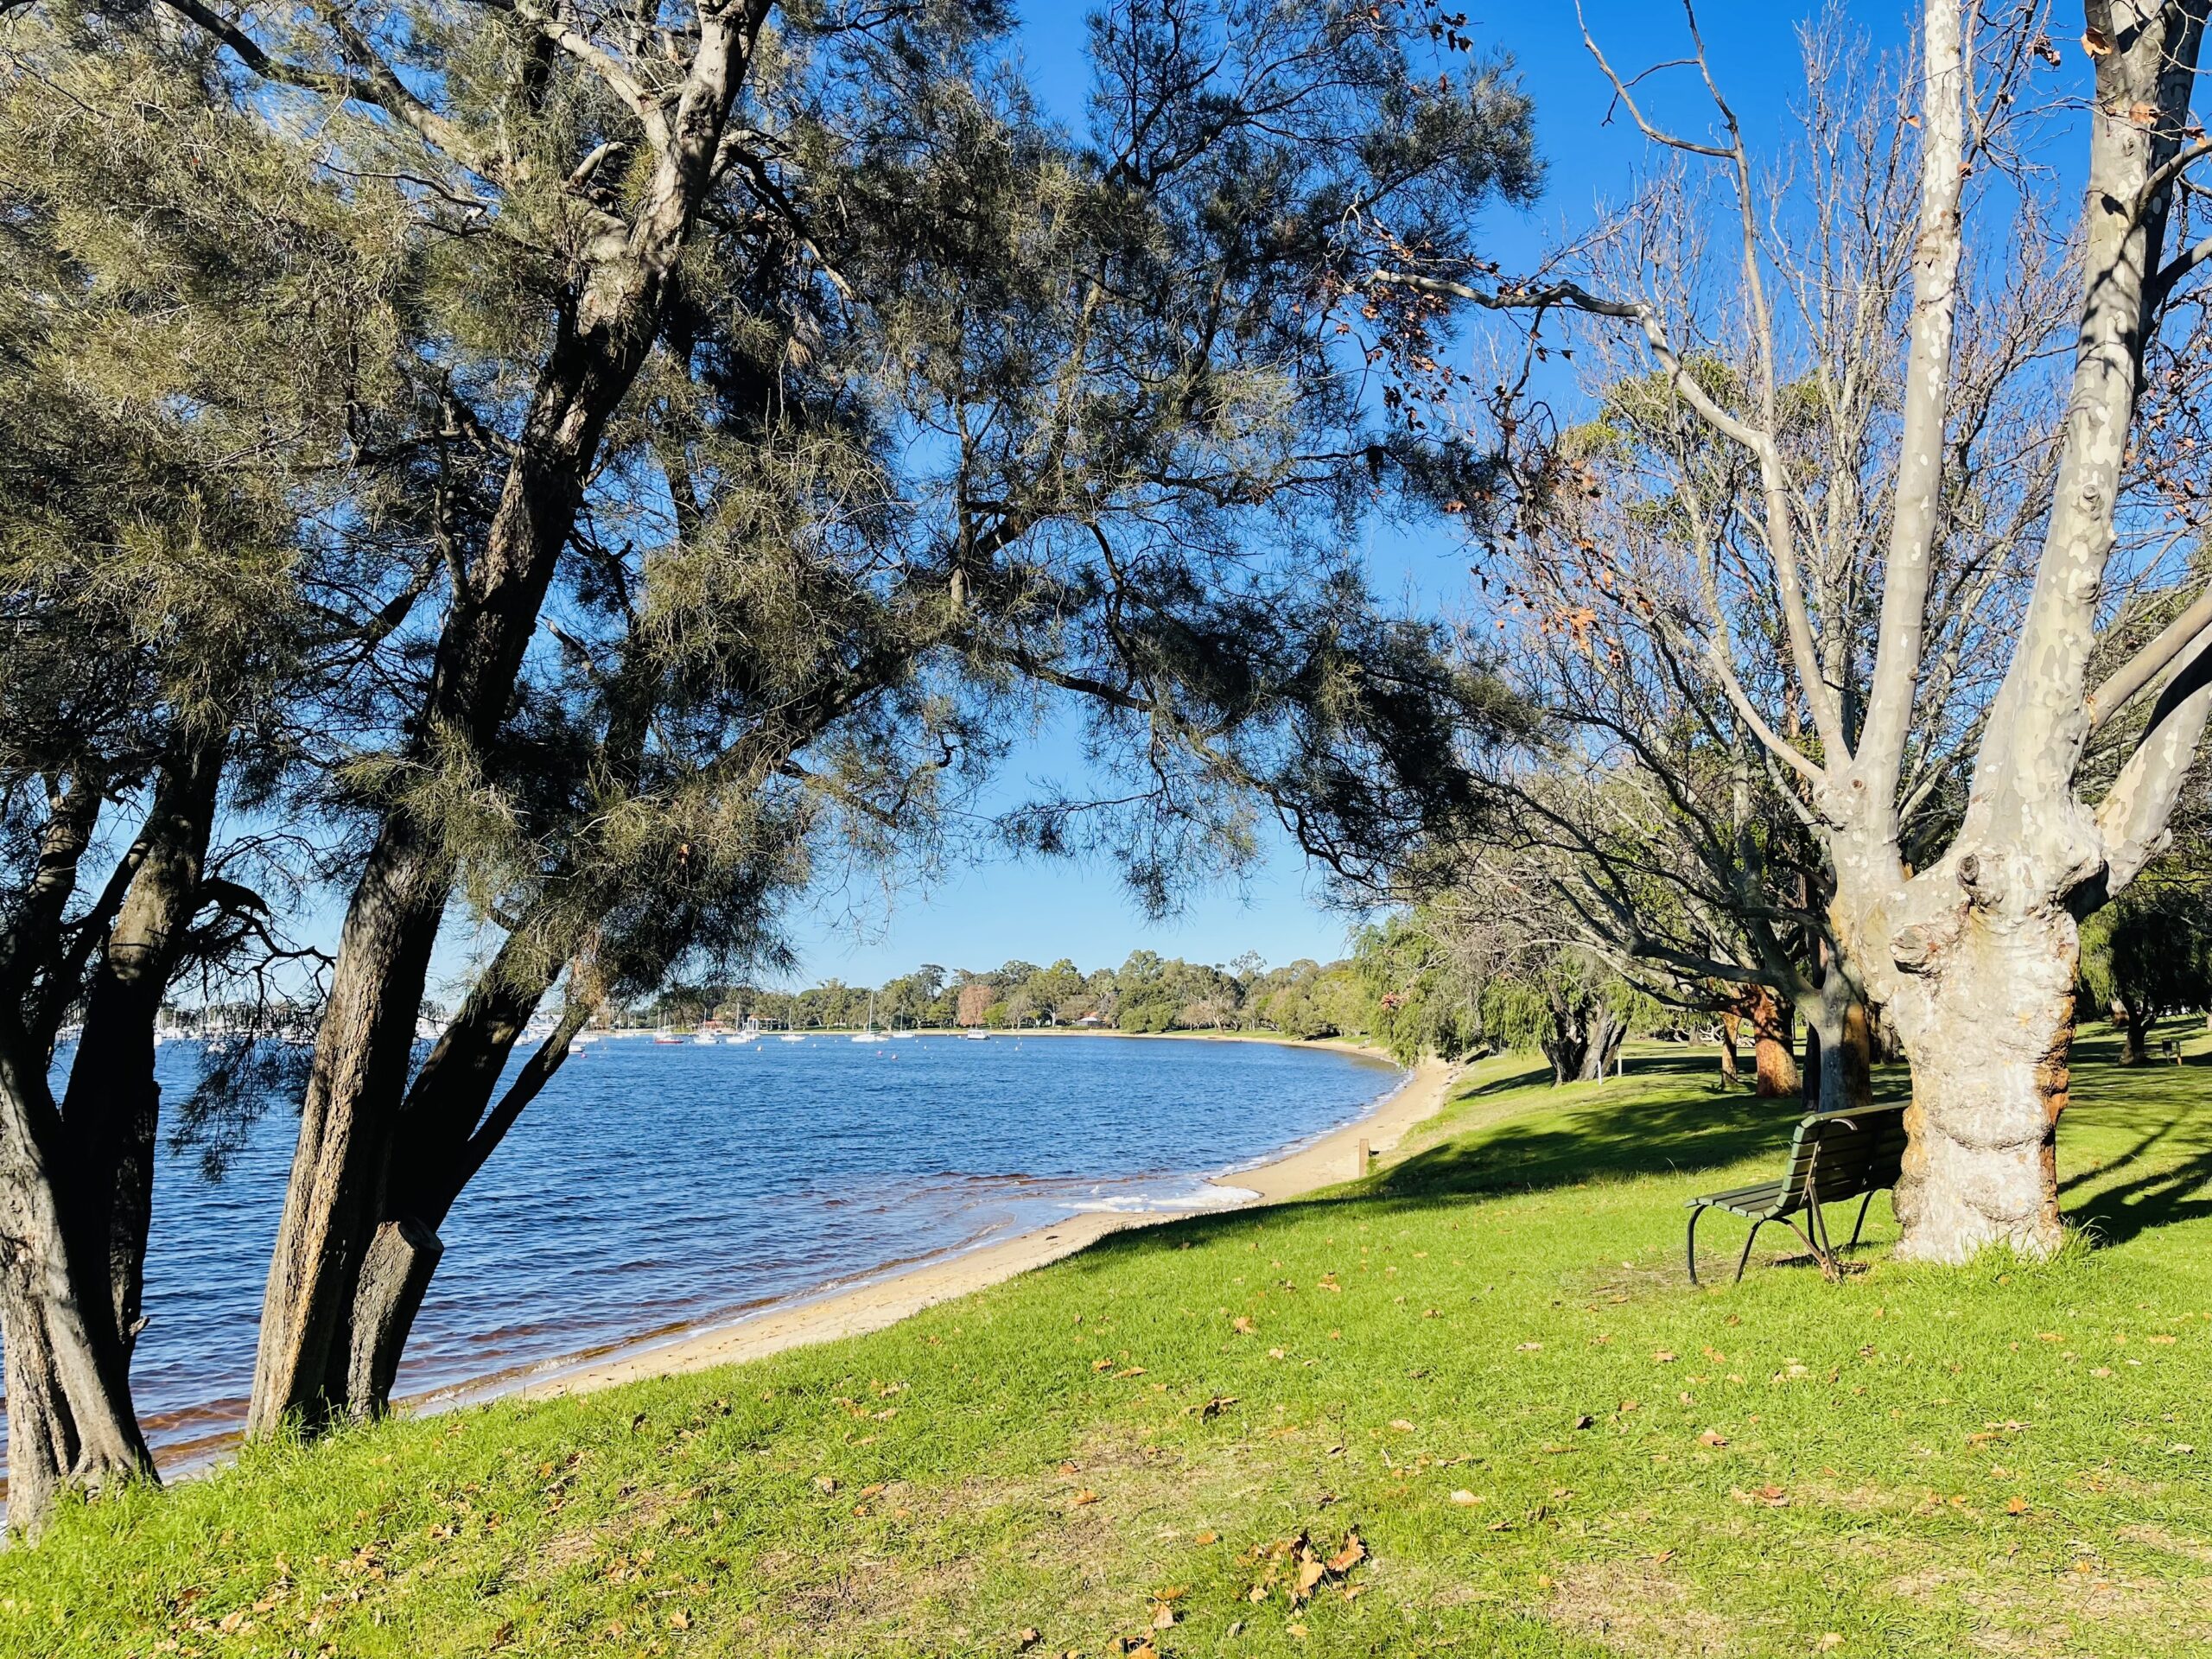 A photo of the bank of the Swan River at Matilda Bay Reserve. Green grass leads to yellow sand, which leads to the river’s edge. Trees and a park bench can be seen on the grassed area. The sky above is bright blue and clear.